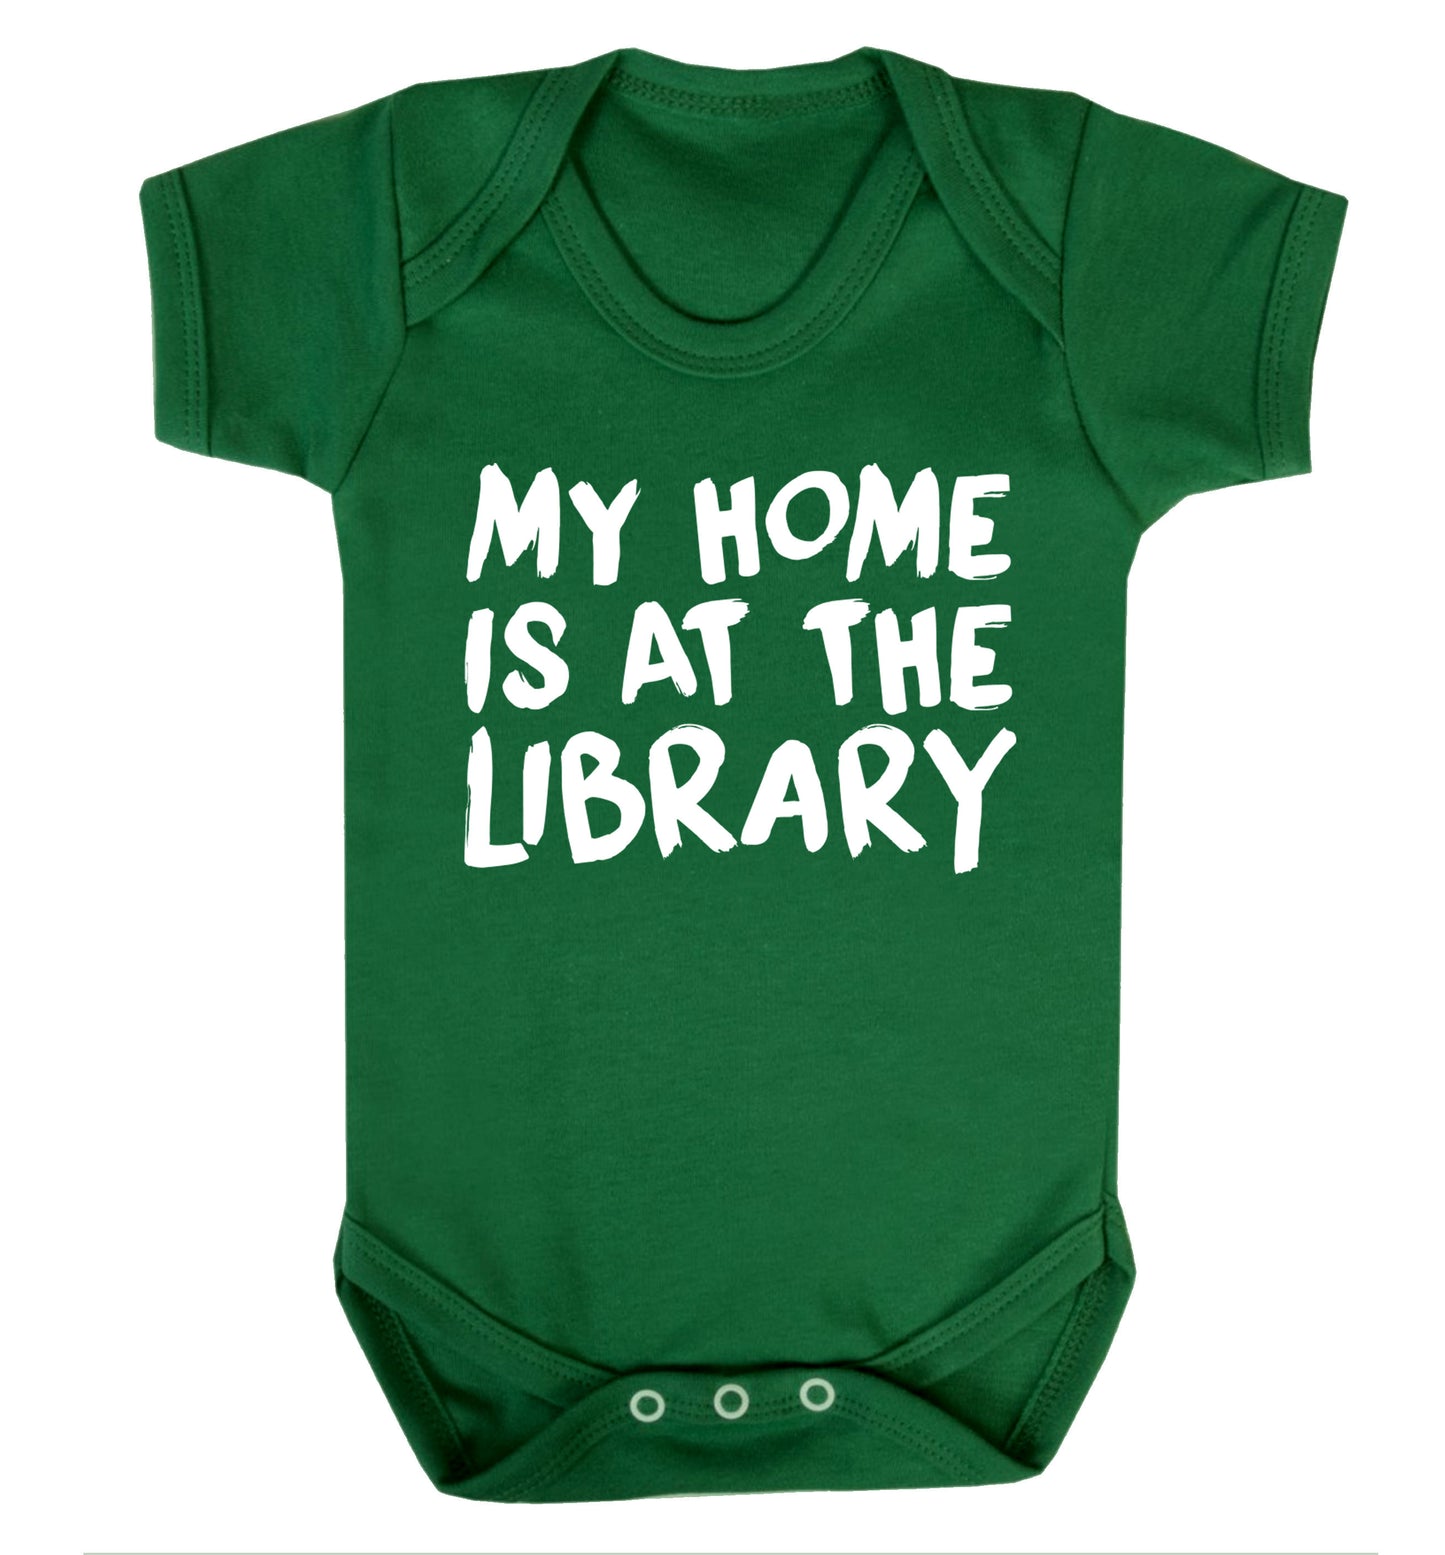 My home is at the library Baby Vest green 18-24 months